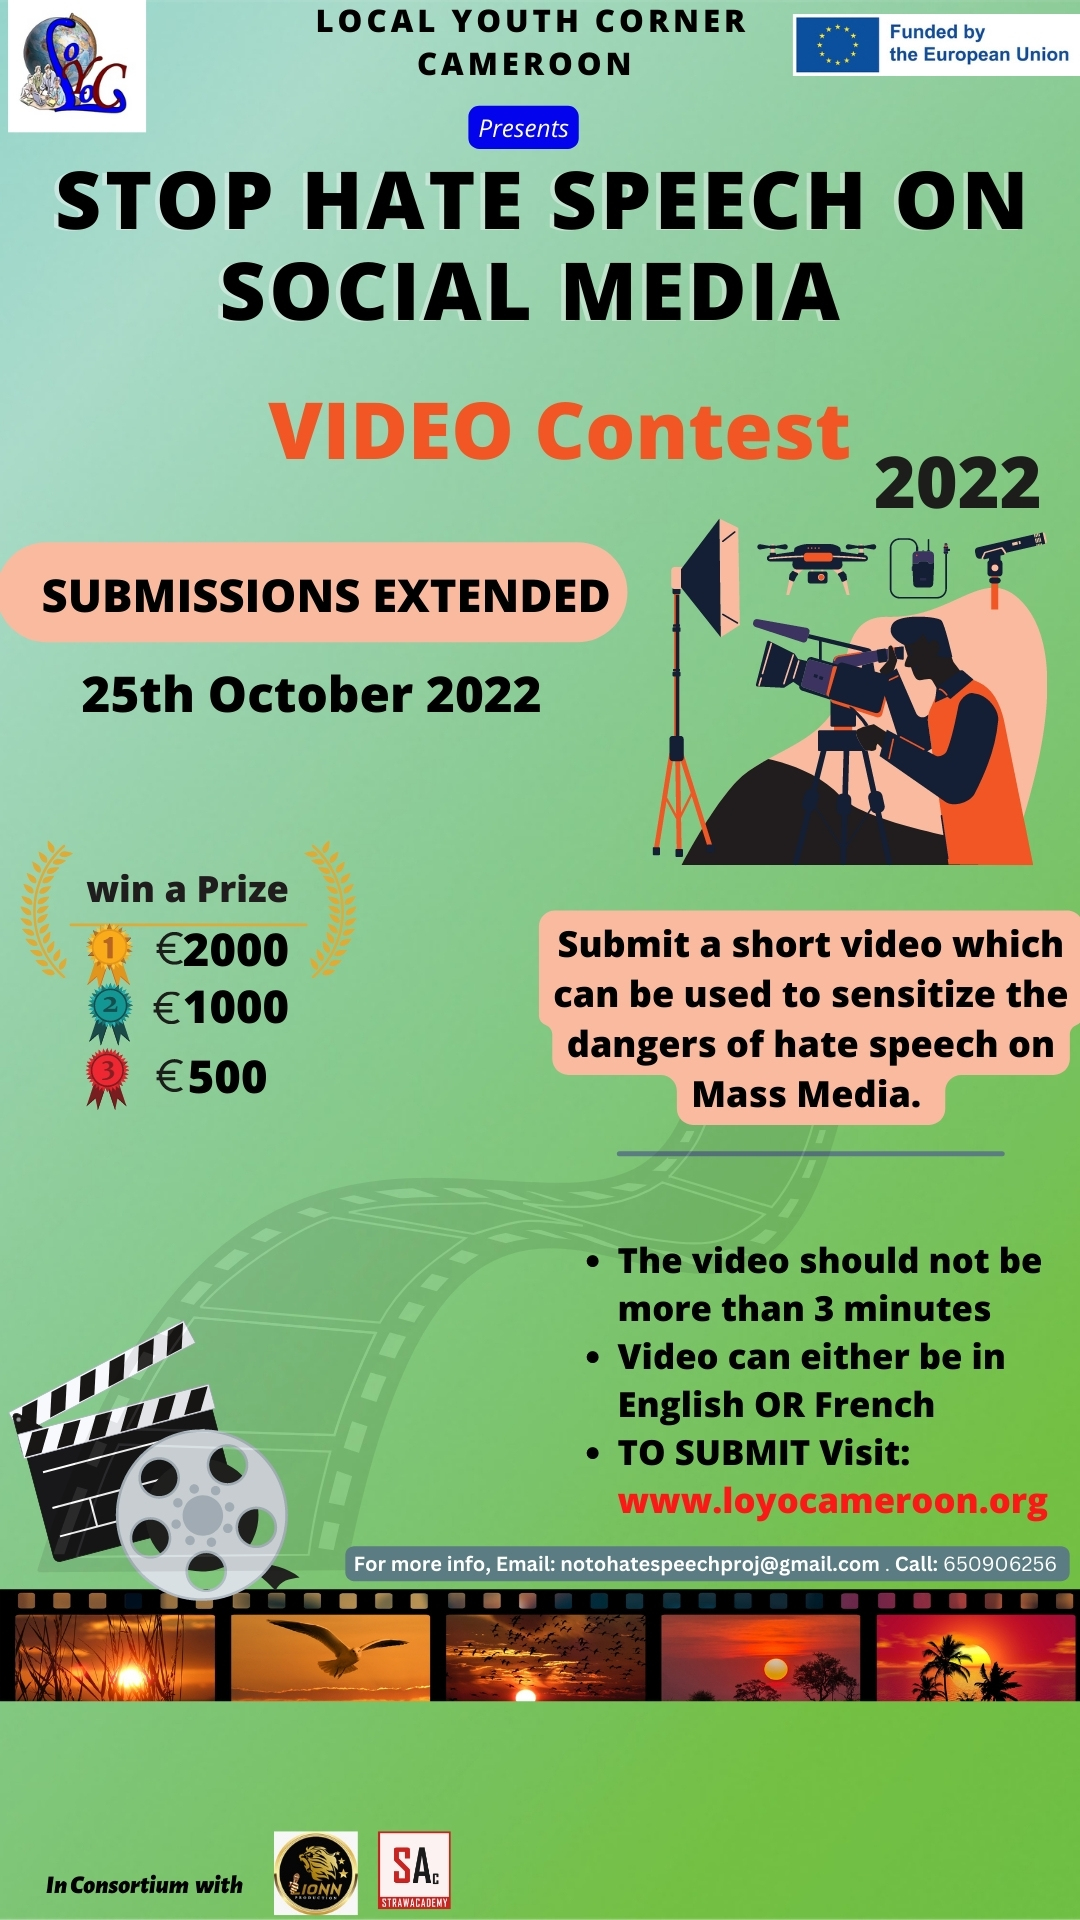 CALL FOR SUBMISSION:  “STOP HATE SPEECH ON SOCIAL MEDIA” VIDEO CONTEST